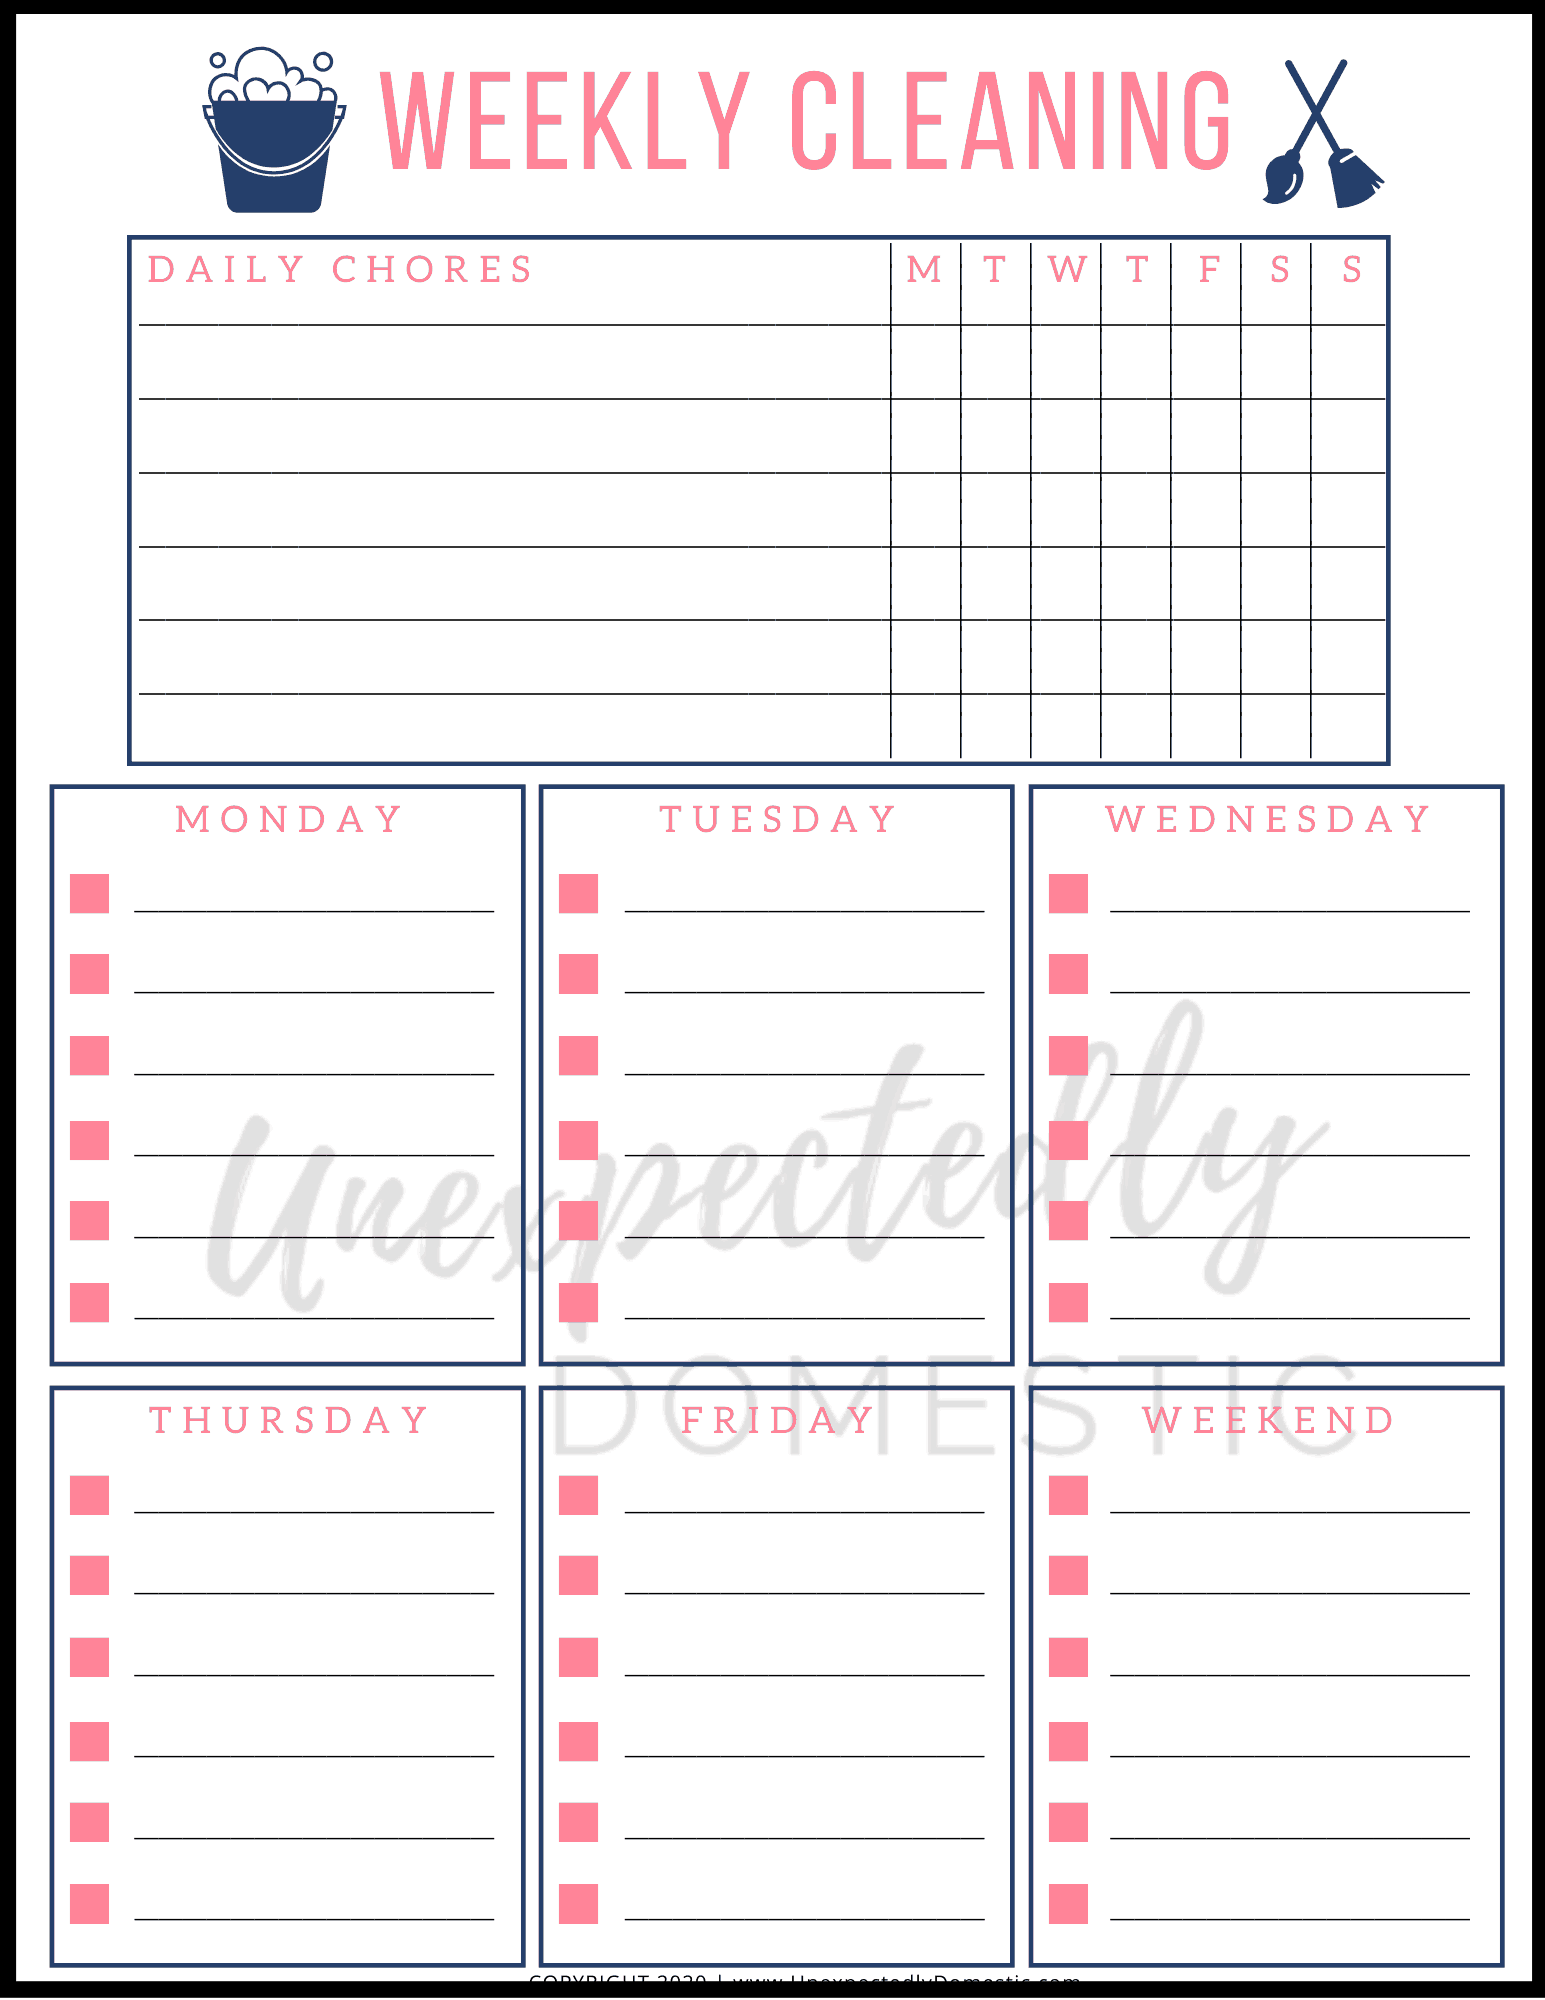 blank-cleaning-schedule-template